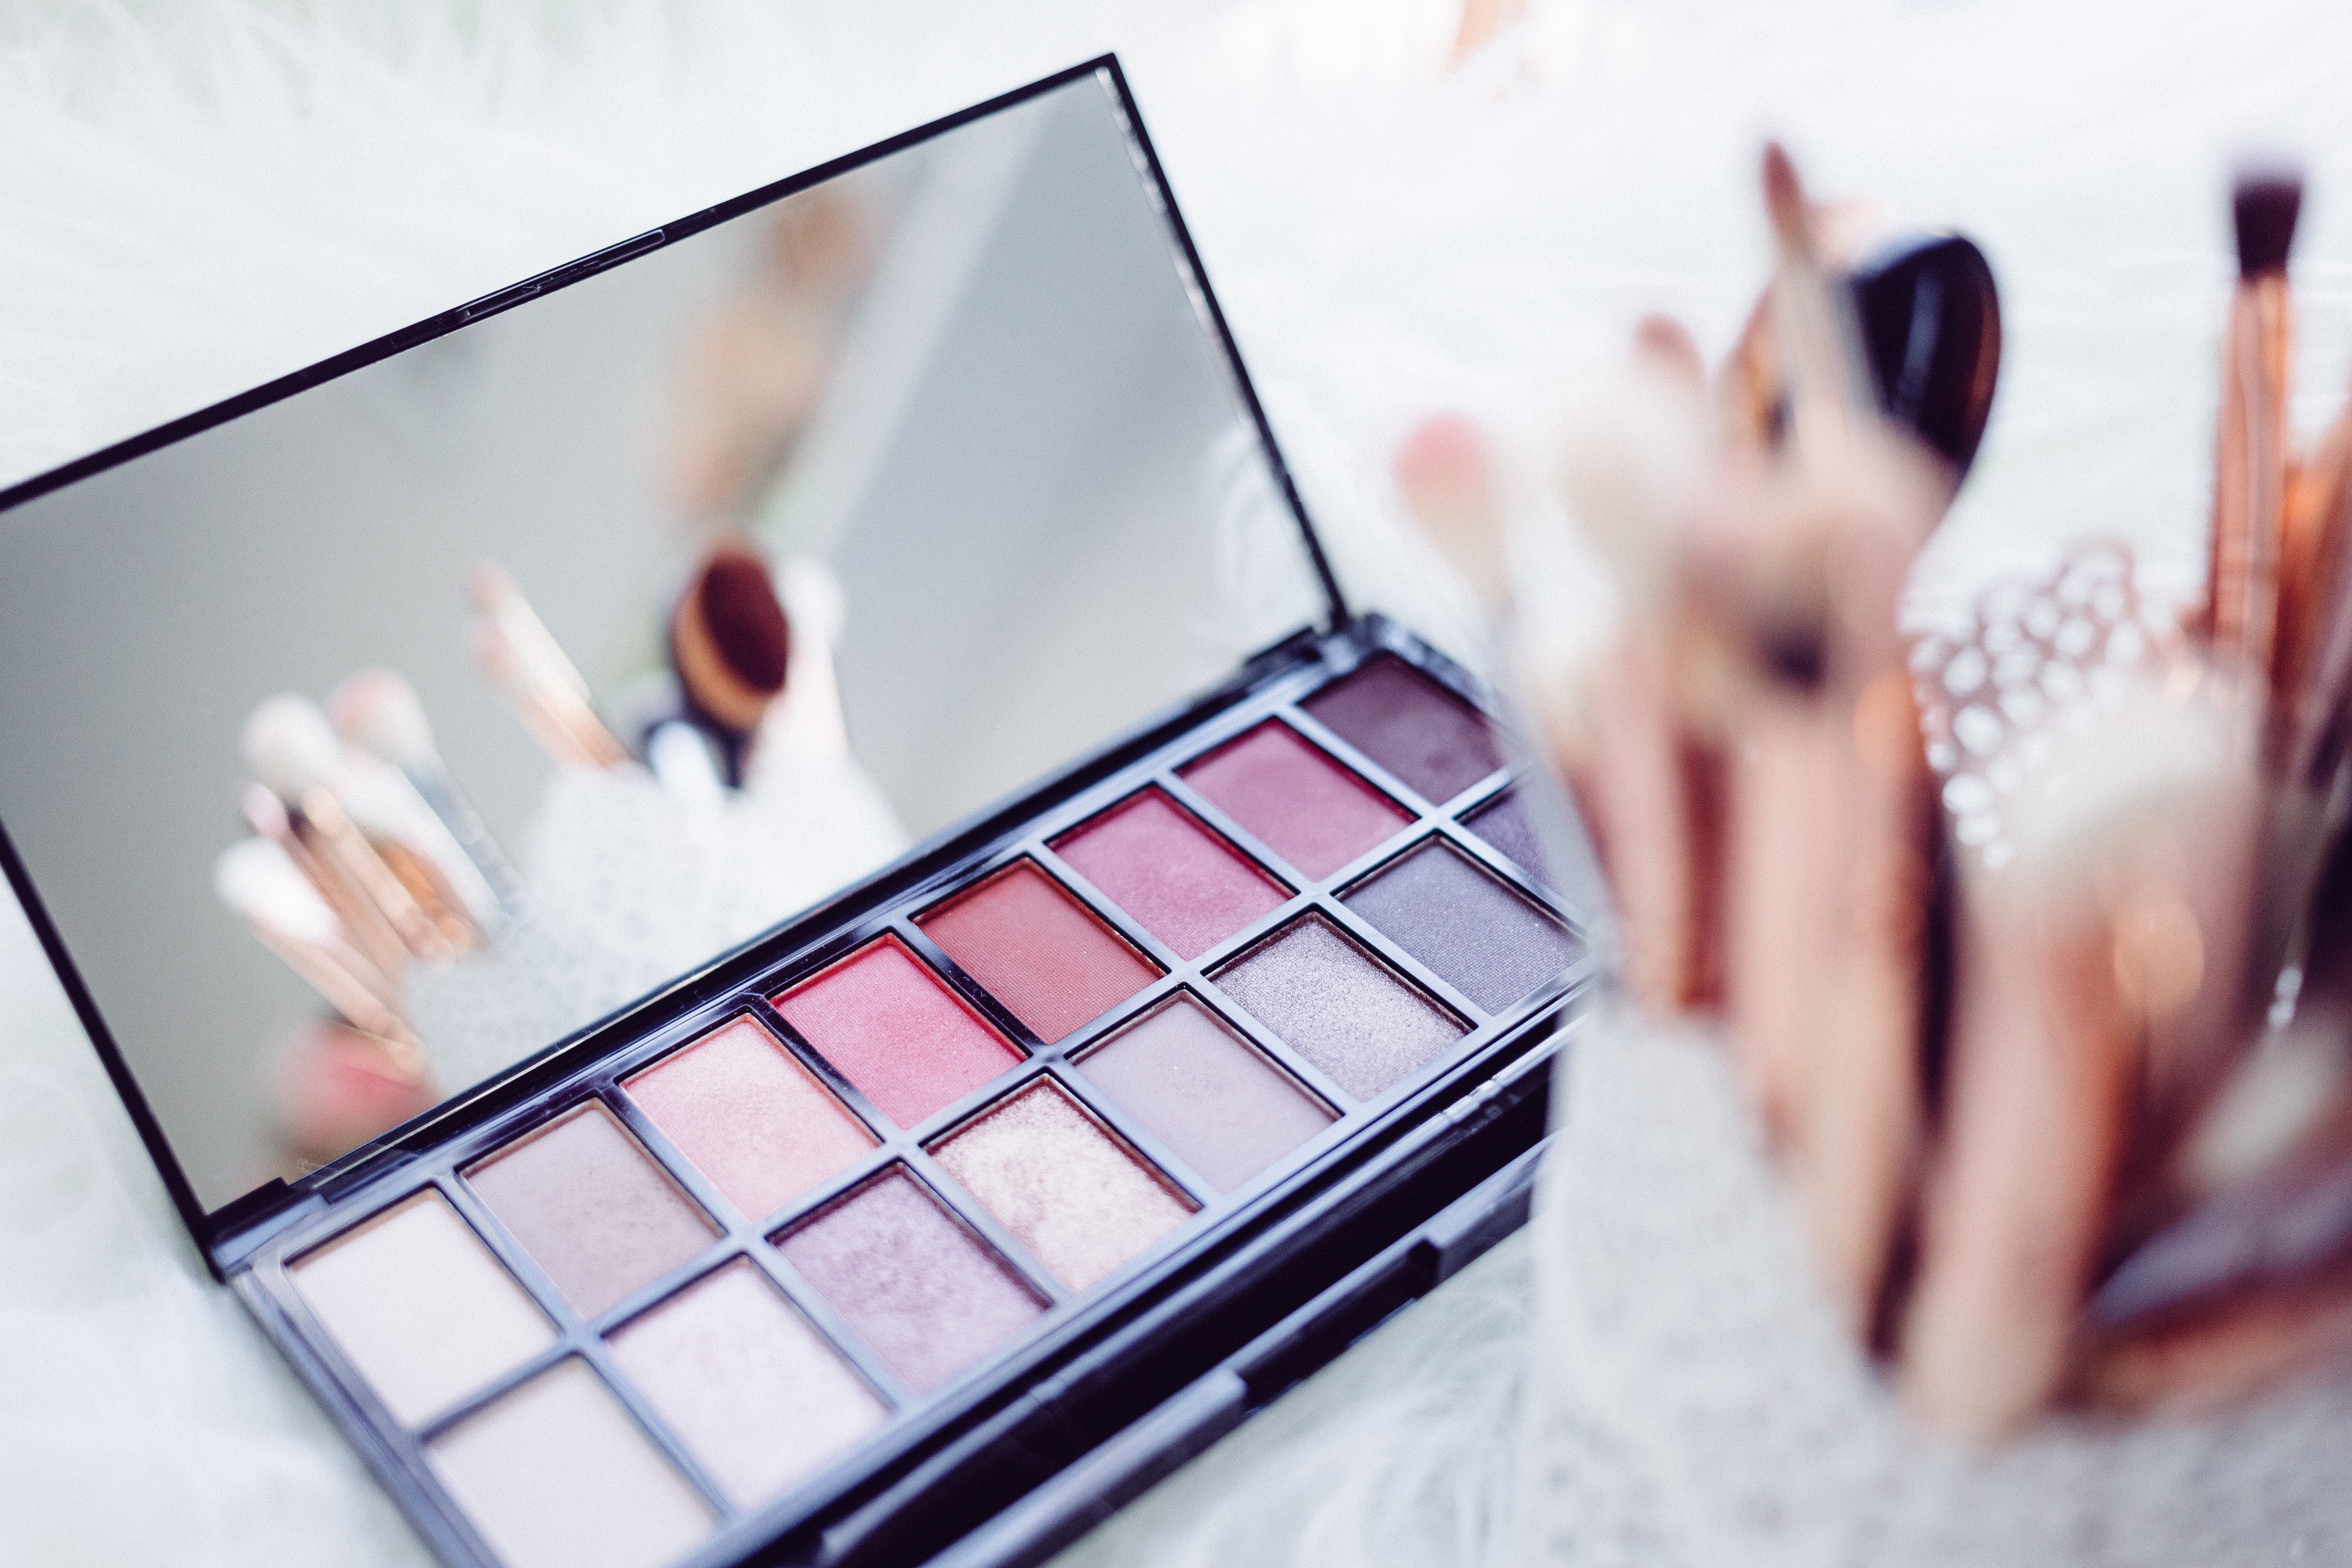 Find Hair And Makeup Artists in   East Perth Get the best prices from 2,000+ of the most reviewed Hair And Makeup Artists  near East Perth. Pick from mobile stylists or salons.